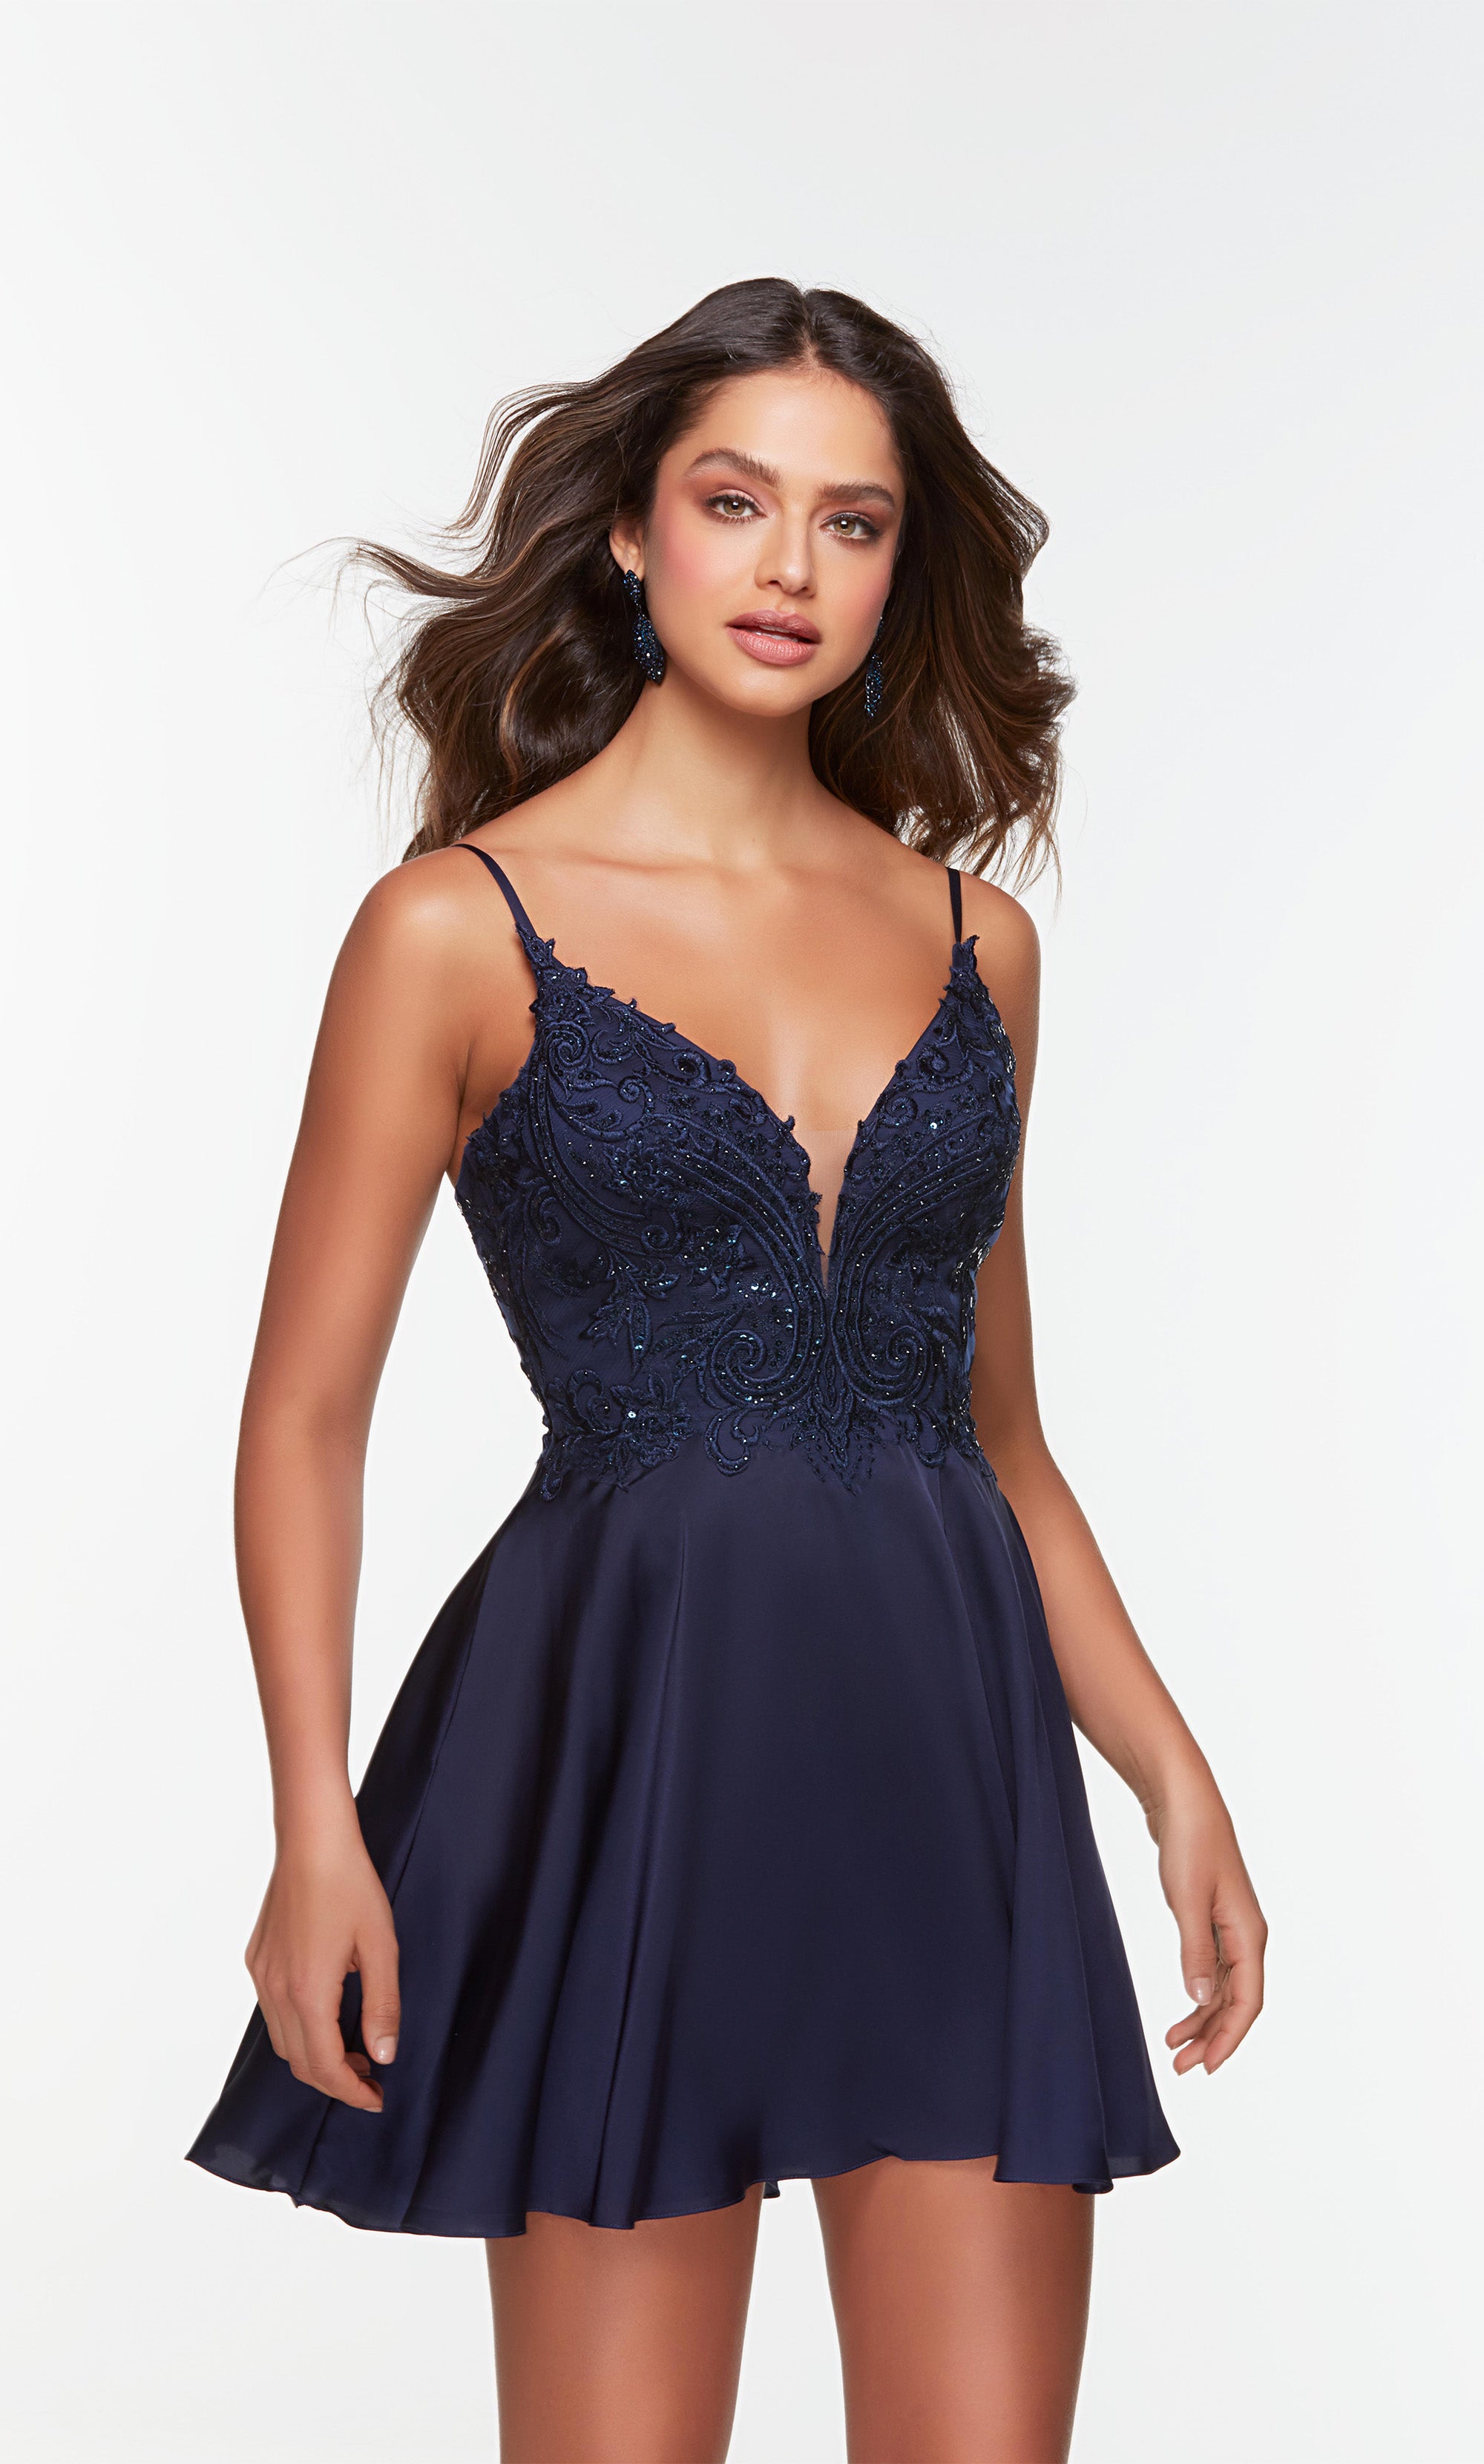 Short girls party dress with a plunging neckline and embellished bodice in midnight blue. Color-SWATCH_3113__MIDNIGHT